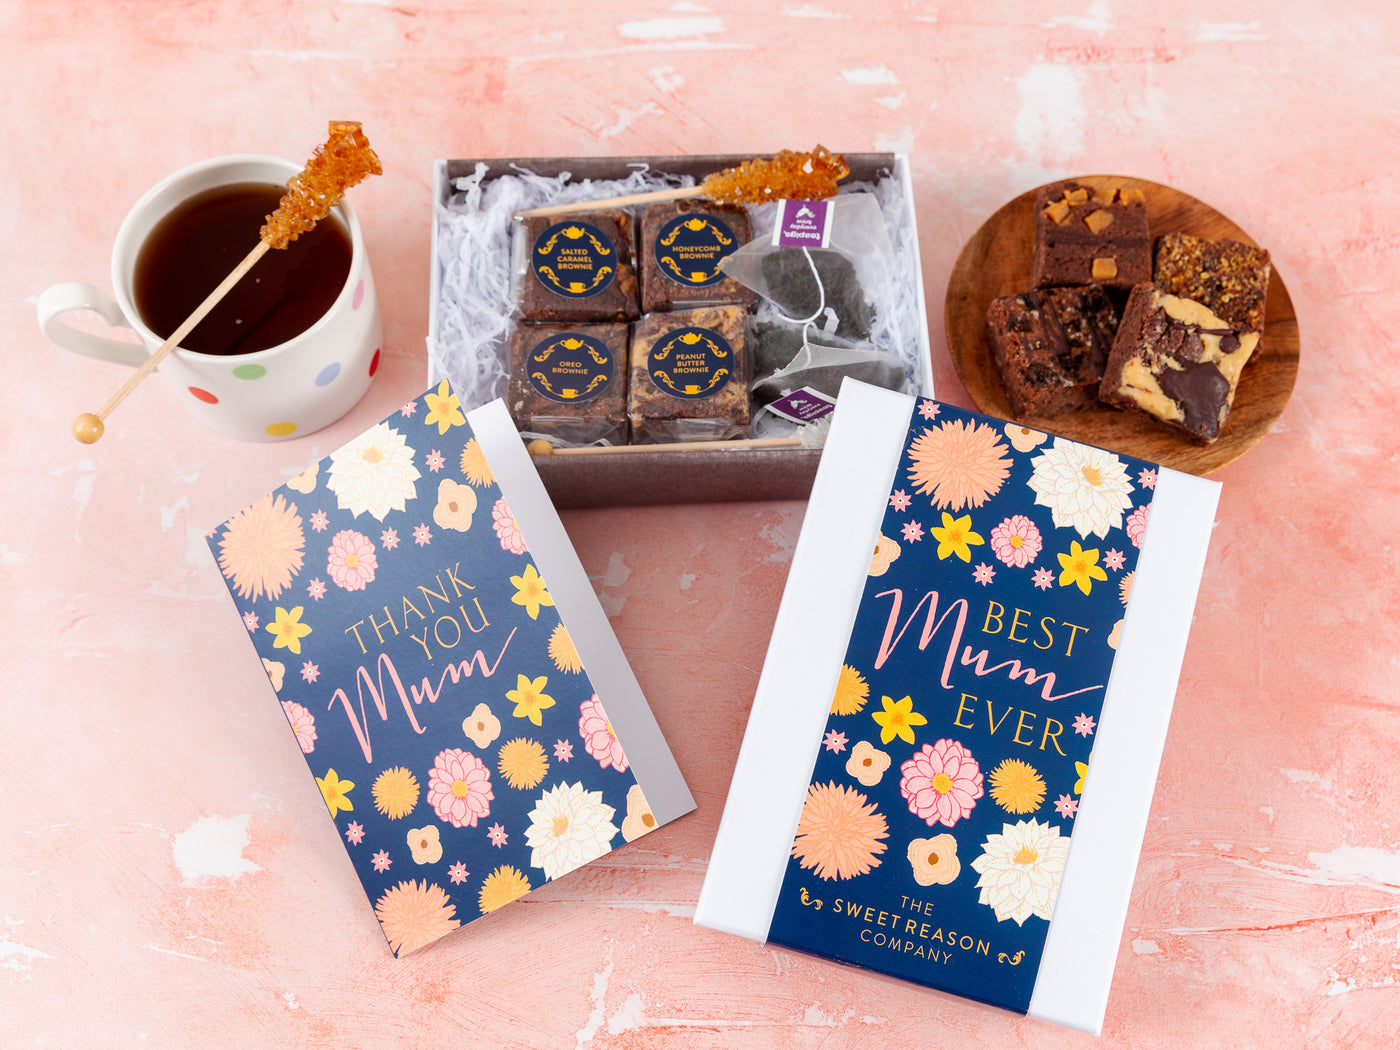 'Best Mum Ever' Gluten Free Afternoon Tea For Two Gift